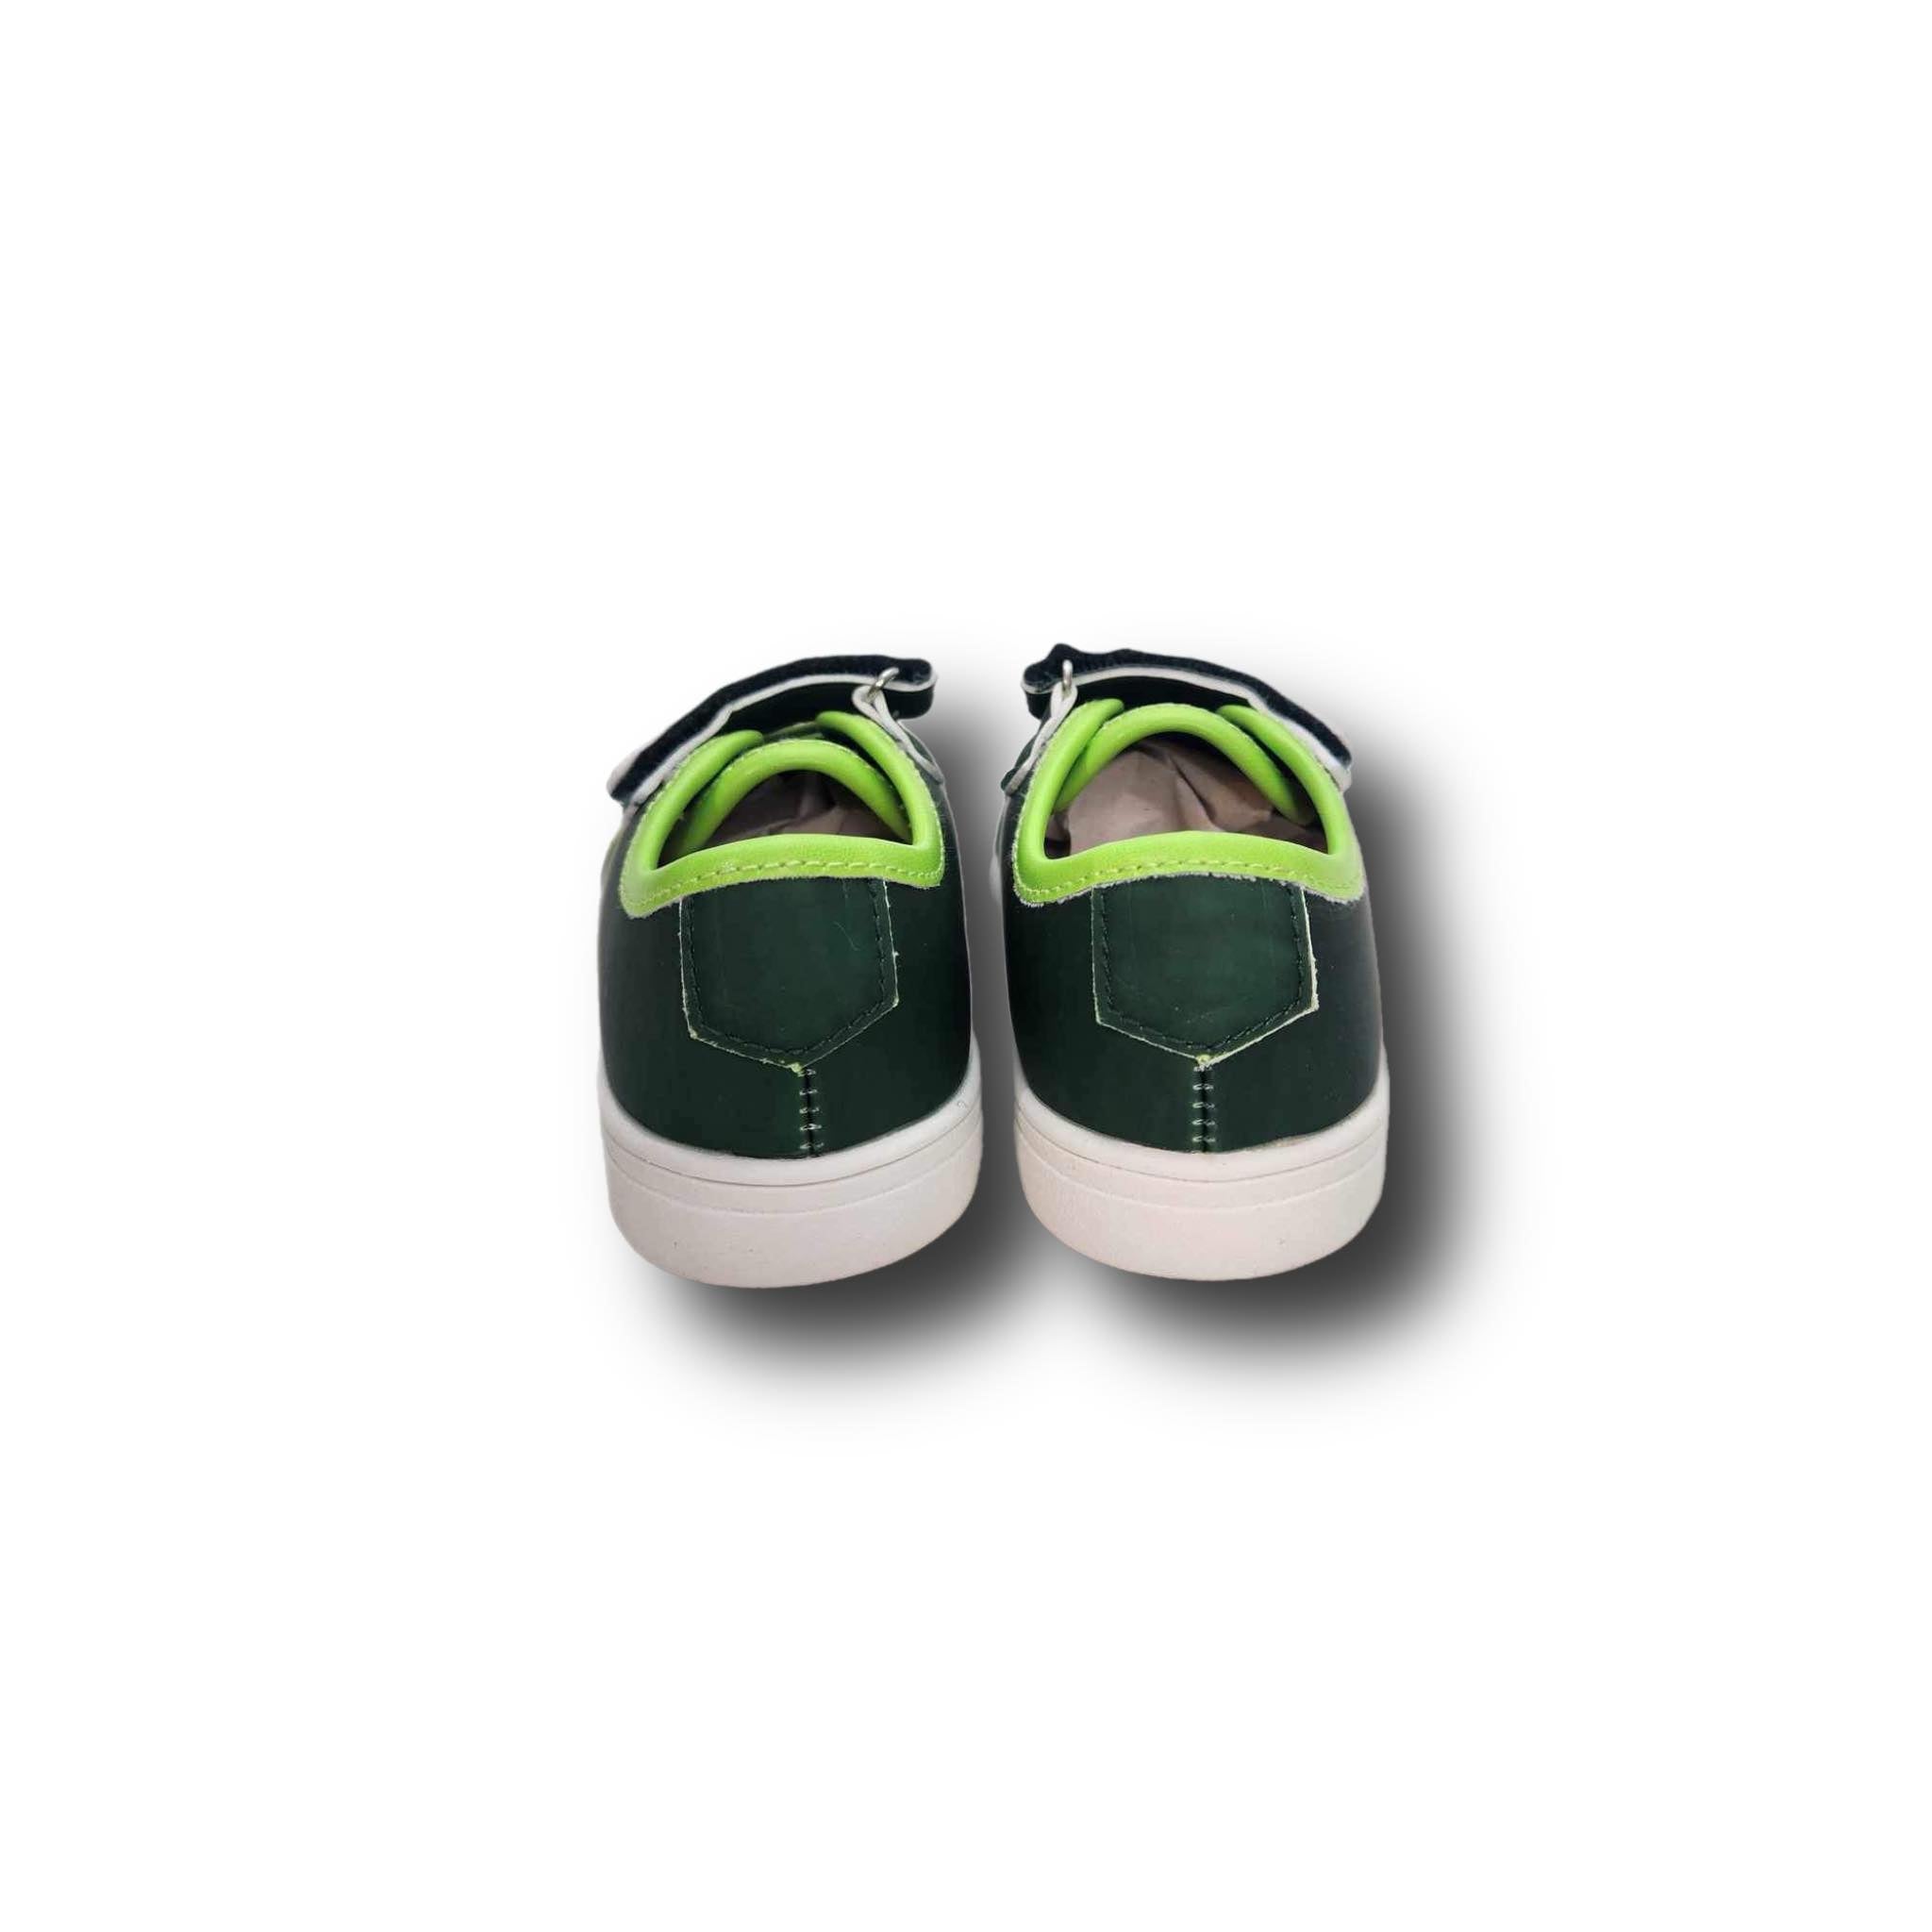 JOSEPH Children's Low-Top Sneaker in Color Changing Green and Lime Leather